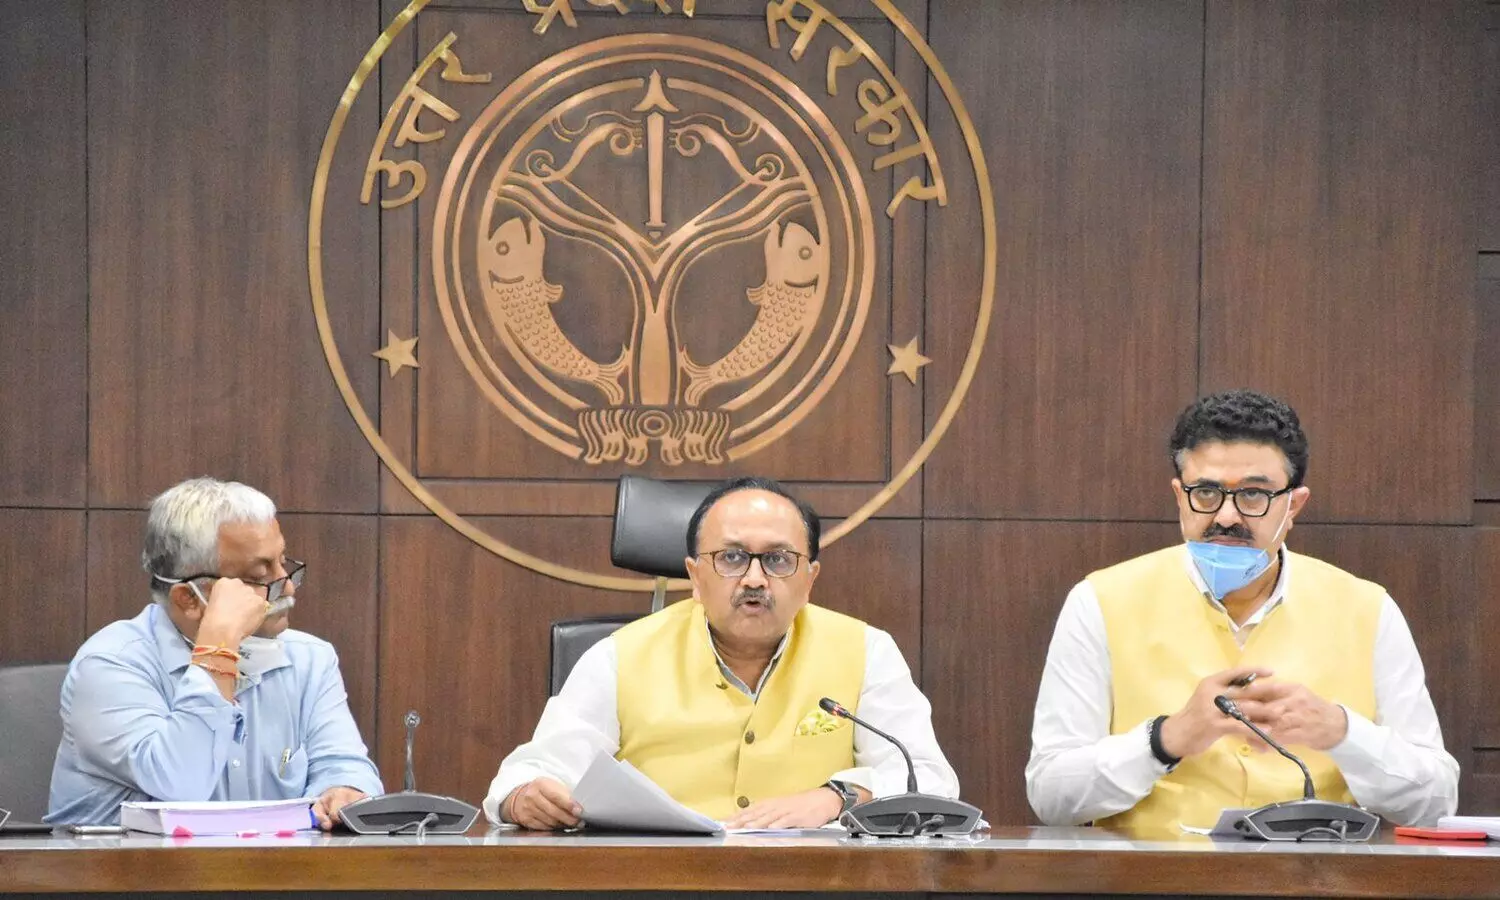 during Press brief cabinet minister Sidharth nath singh and officers